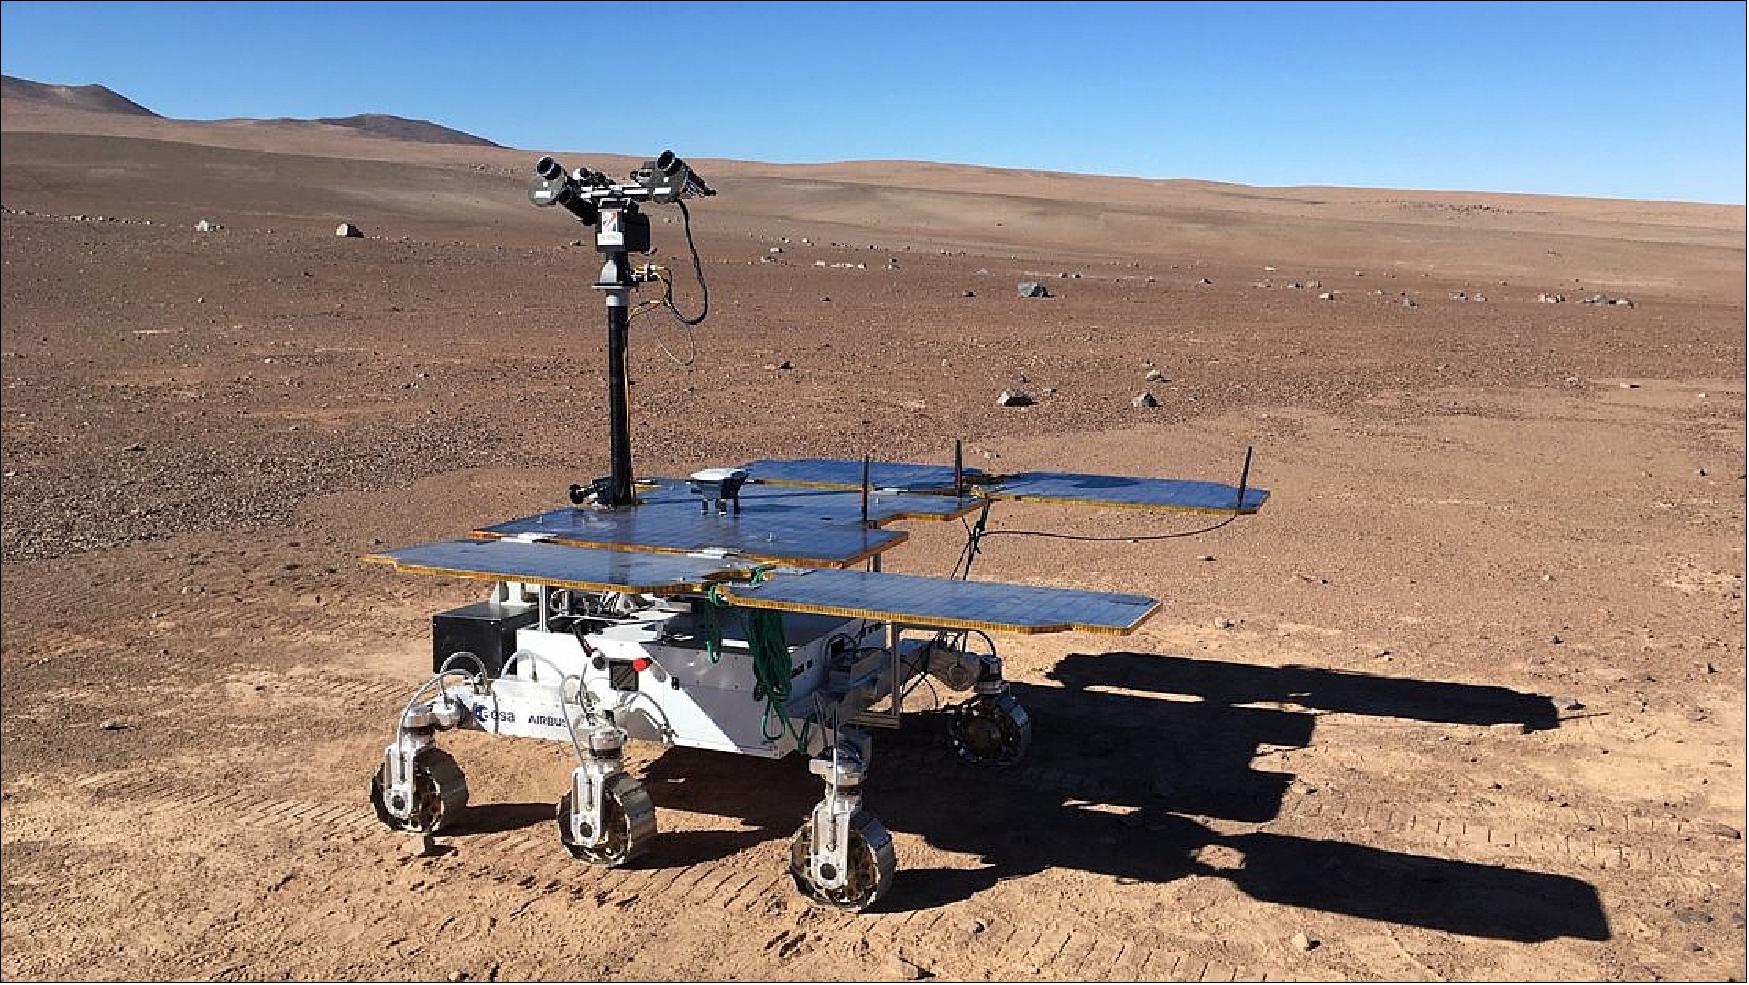 Figure 76: The ExoFit model of the Rosalind Franklin rover that will be sent to Mars in 2021 scouting the Atacama Desert, in Chile, following commands from mission control in the United Kingdom, over 11,000 km away. The ExoFiT field campaign simulates ExoMars operations in every key aspect. During the trial, the rover drove from its landing platform and targets sites of interest to sample rocks in the Mars-like landscapes of the Chilean desert (image credit: Airbus).